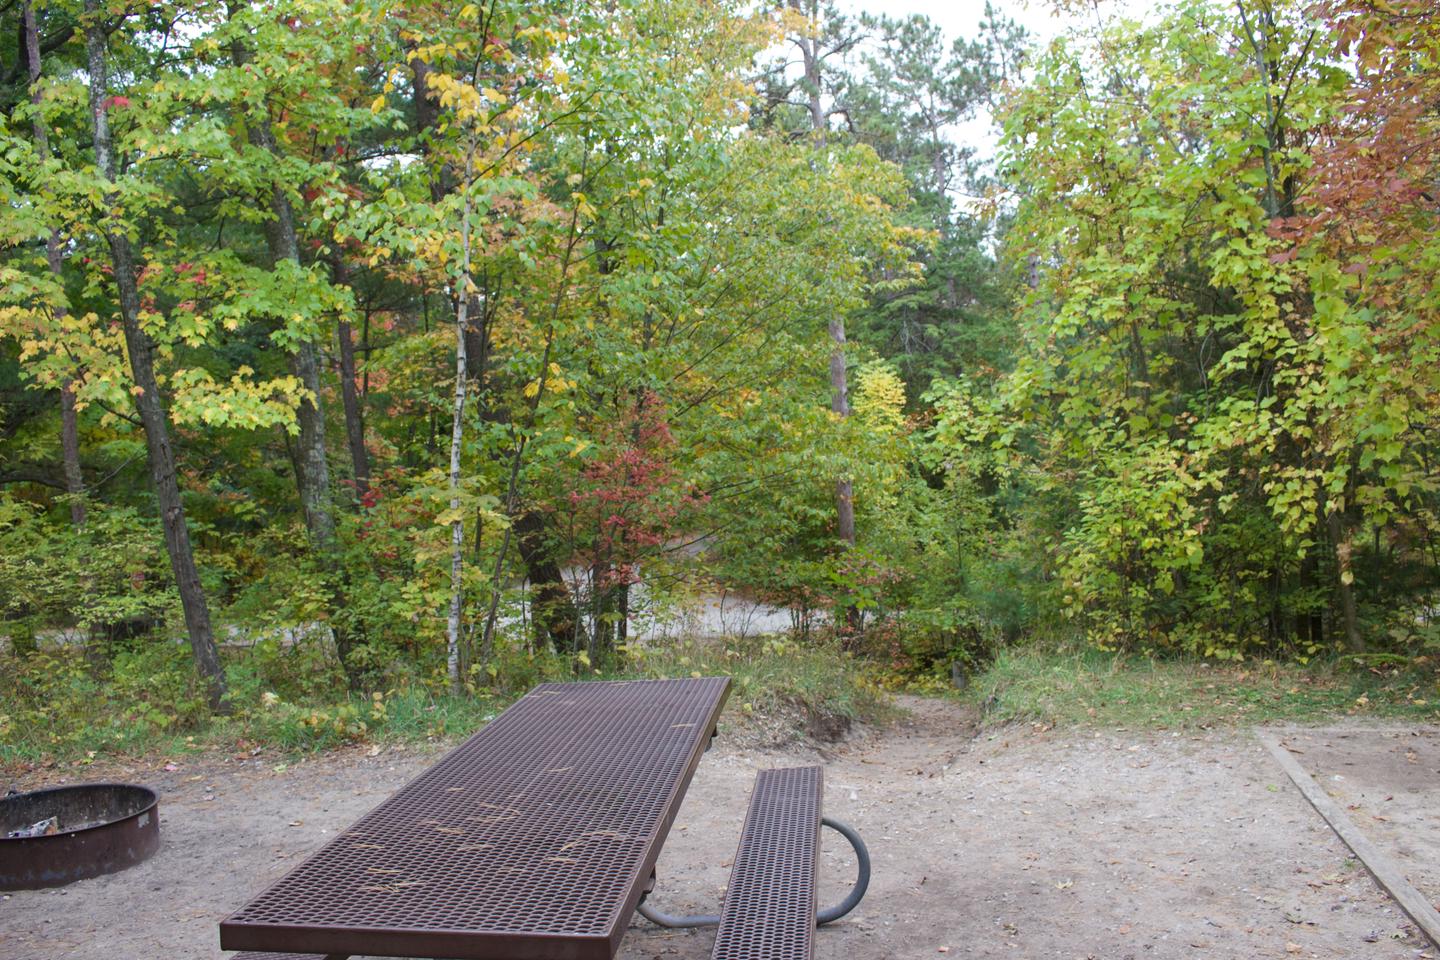 Campsite #57, view from the site toward the parking